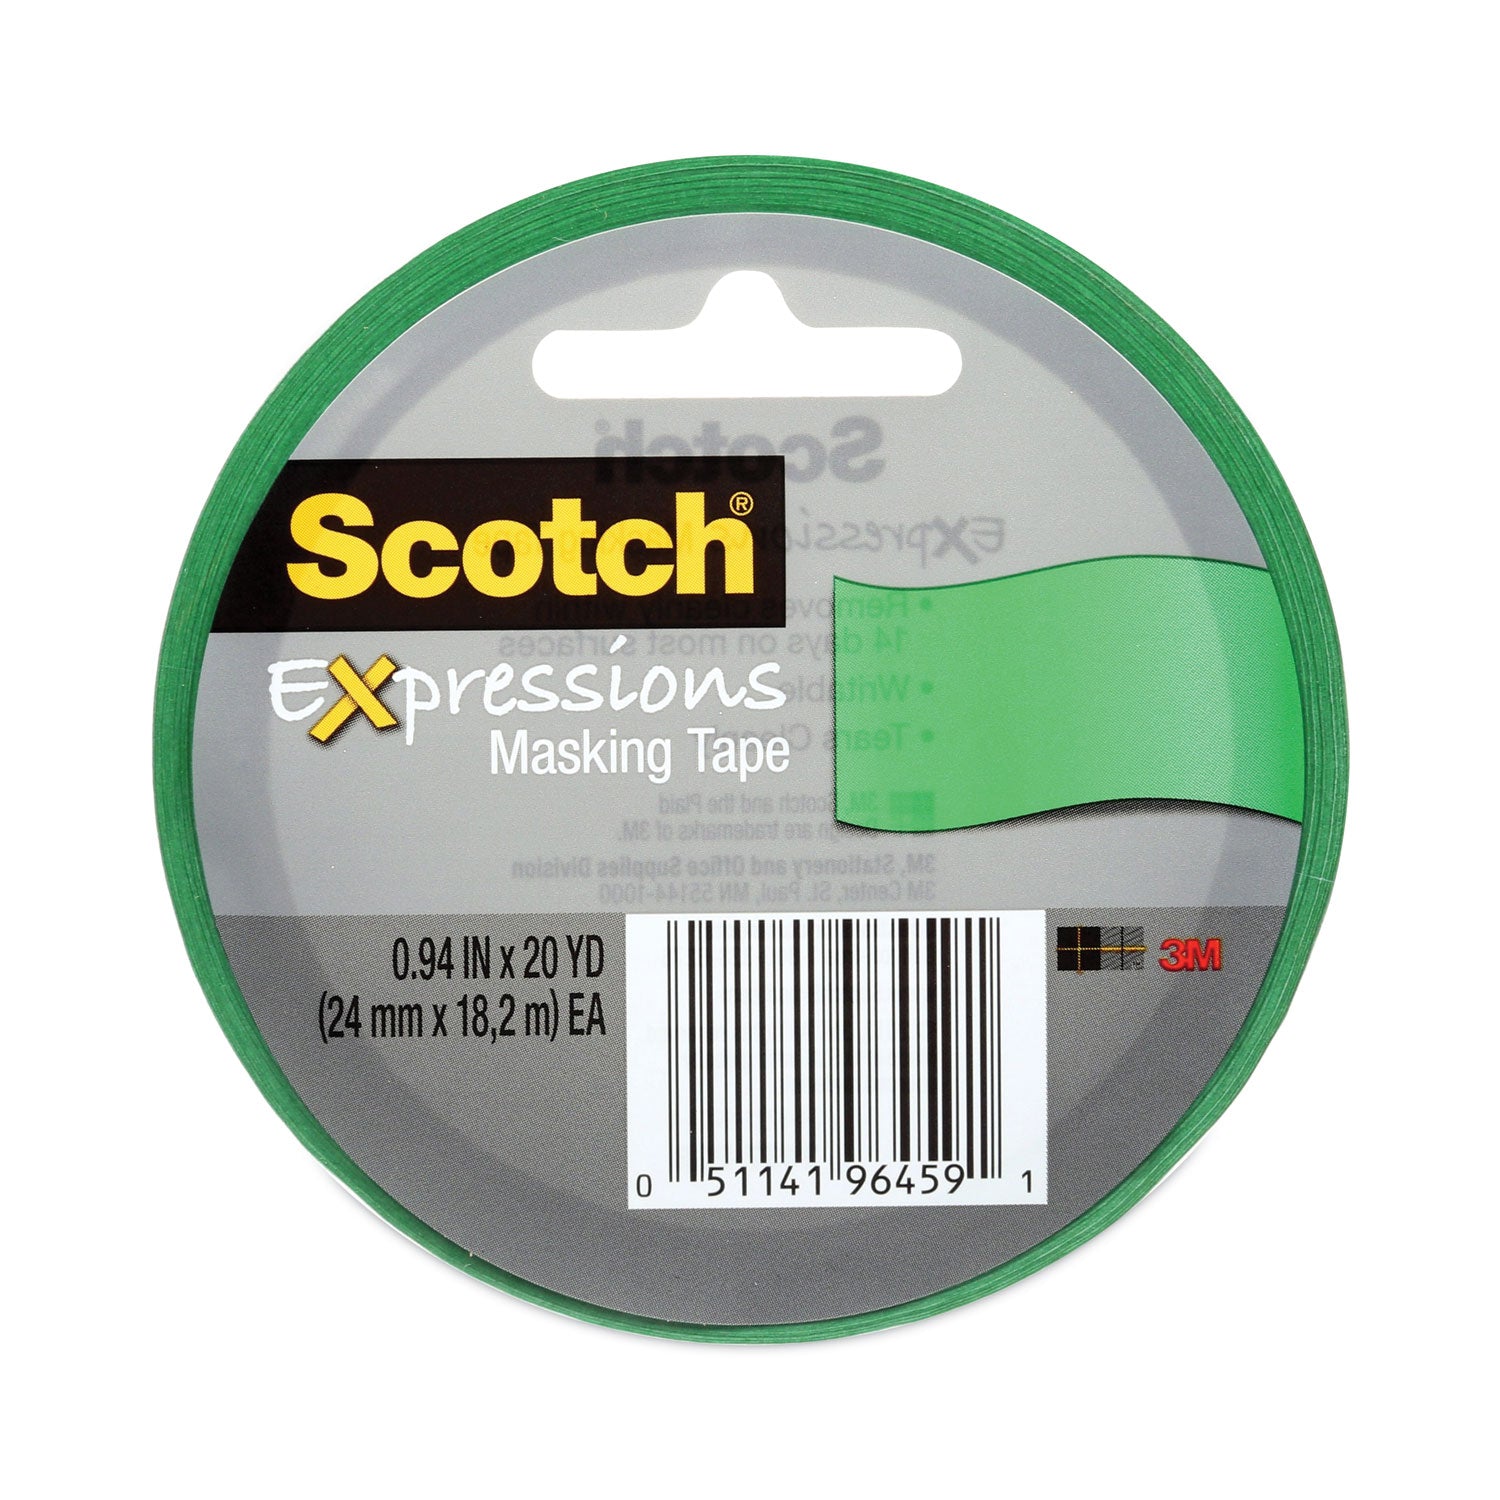 Expressions Masking Tape, 3" Core, 0.94" x 20 yds, Primary Green - 